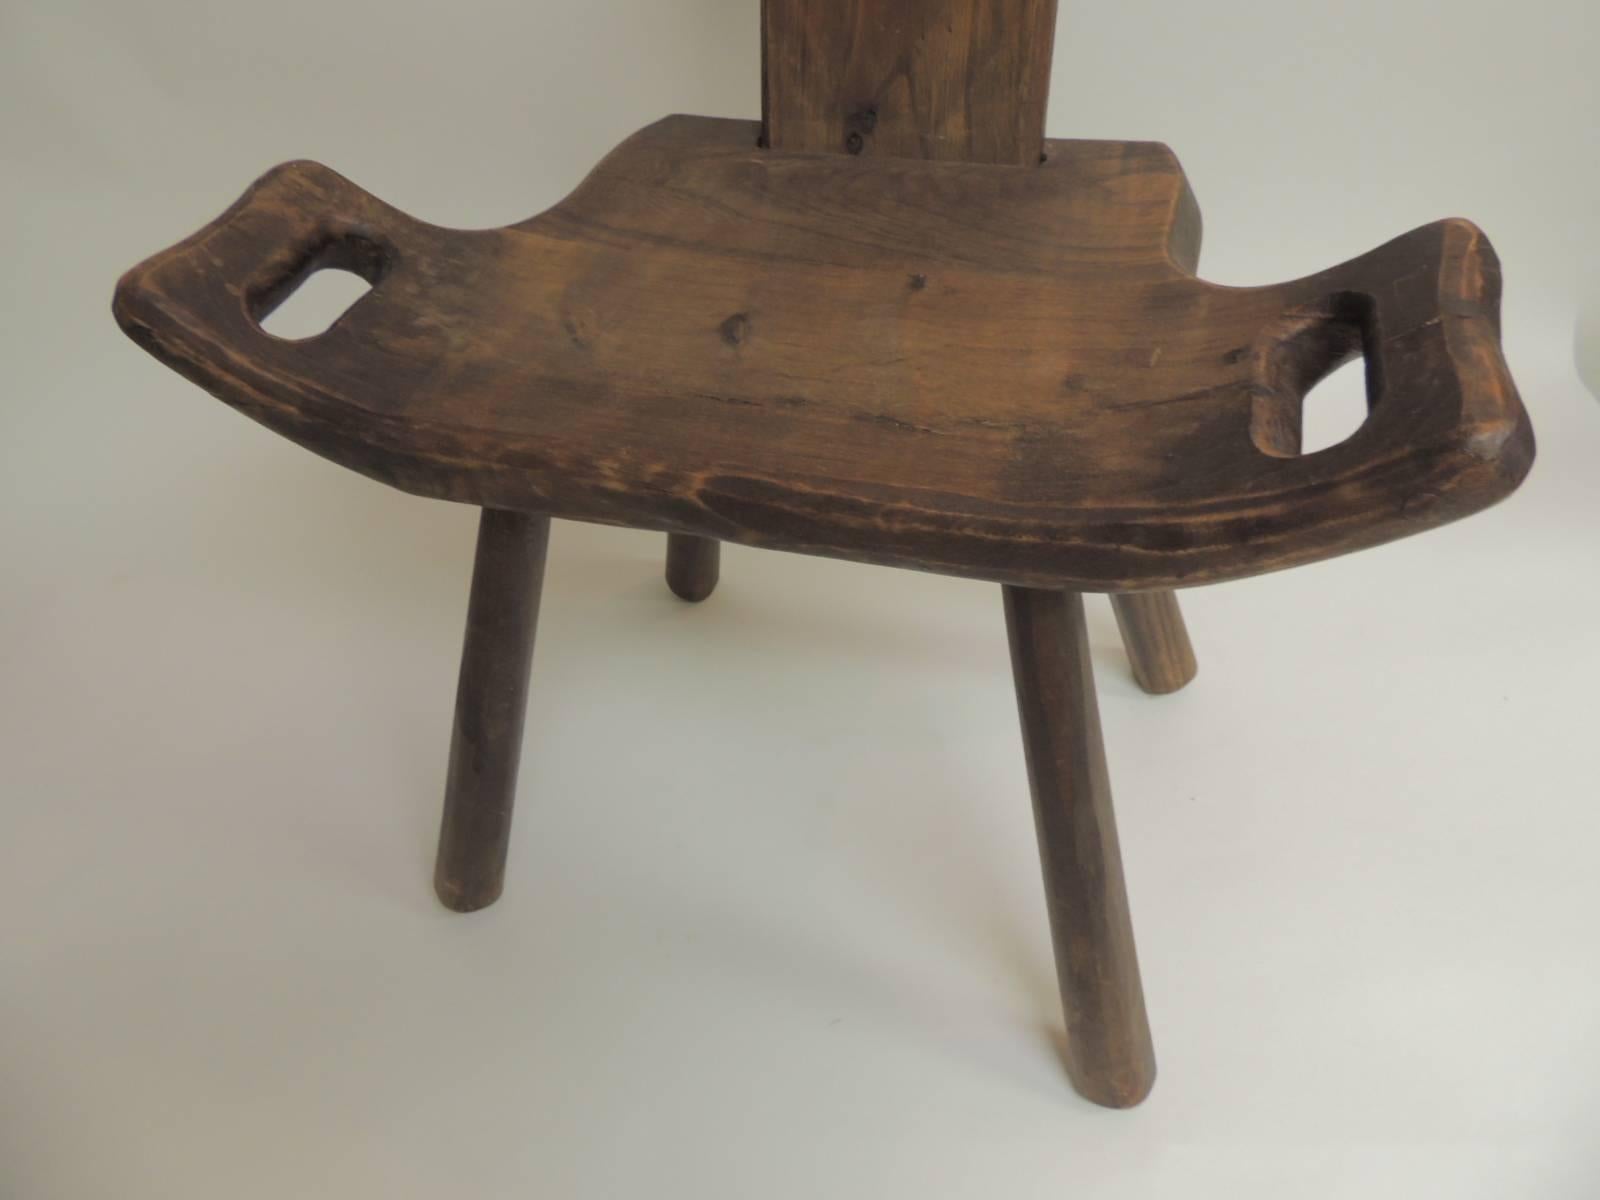 Vintage primitive rustic Belgian artisanal birthing chair with four legs
Vintage birthing chair with four legs and quatrefoil piercing in the back. Artisanal made with carved wood in the seat and the back. Nice patina on the carved wood due to